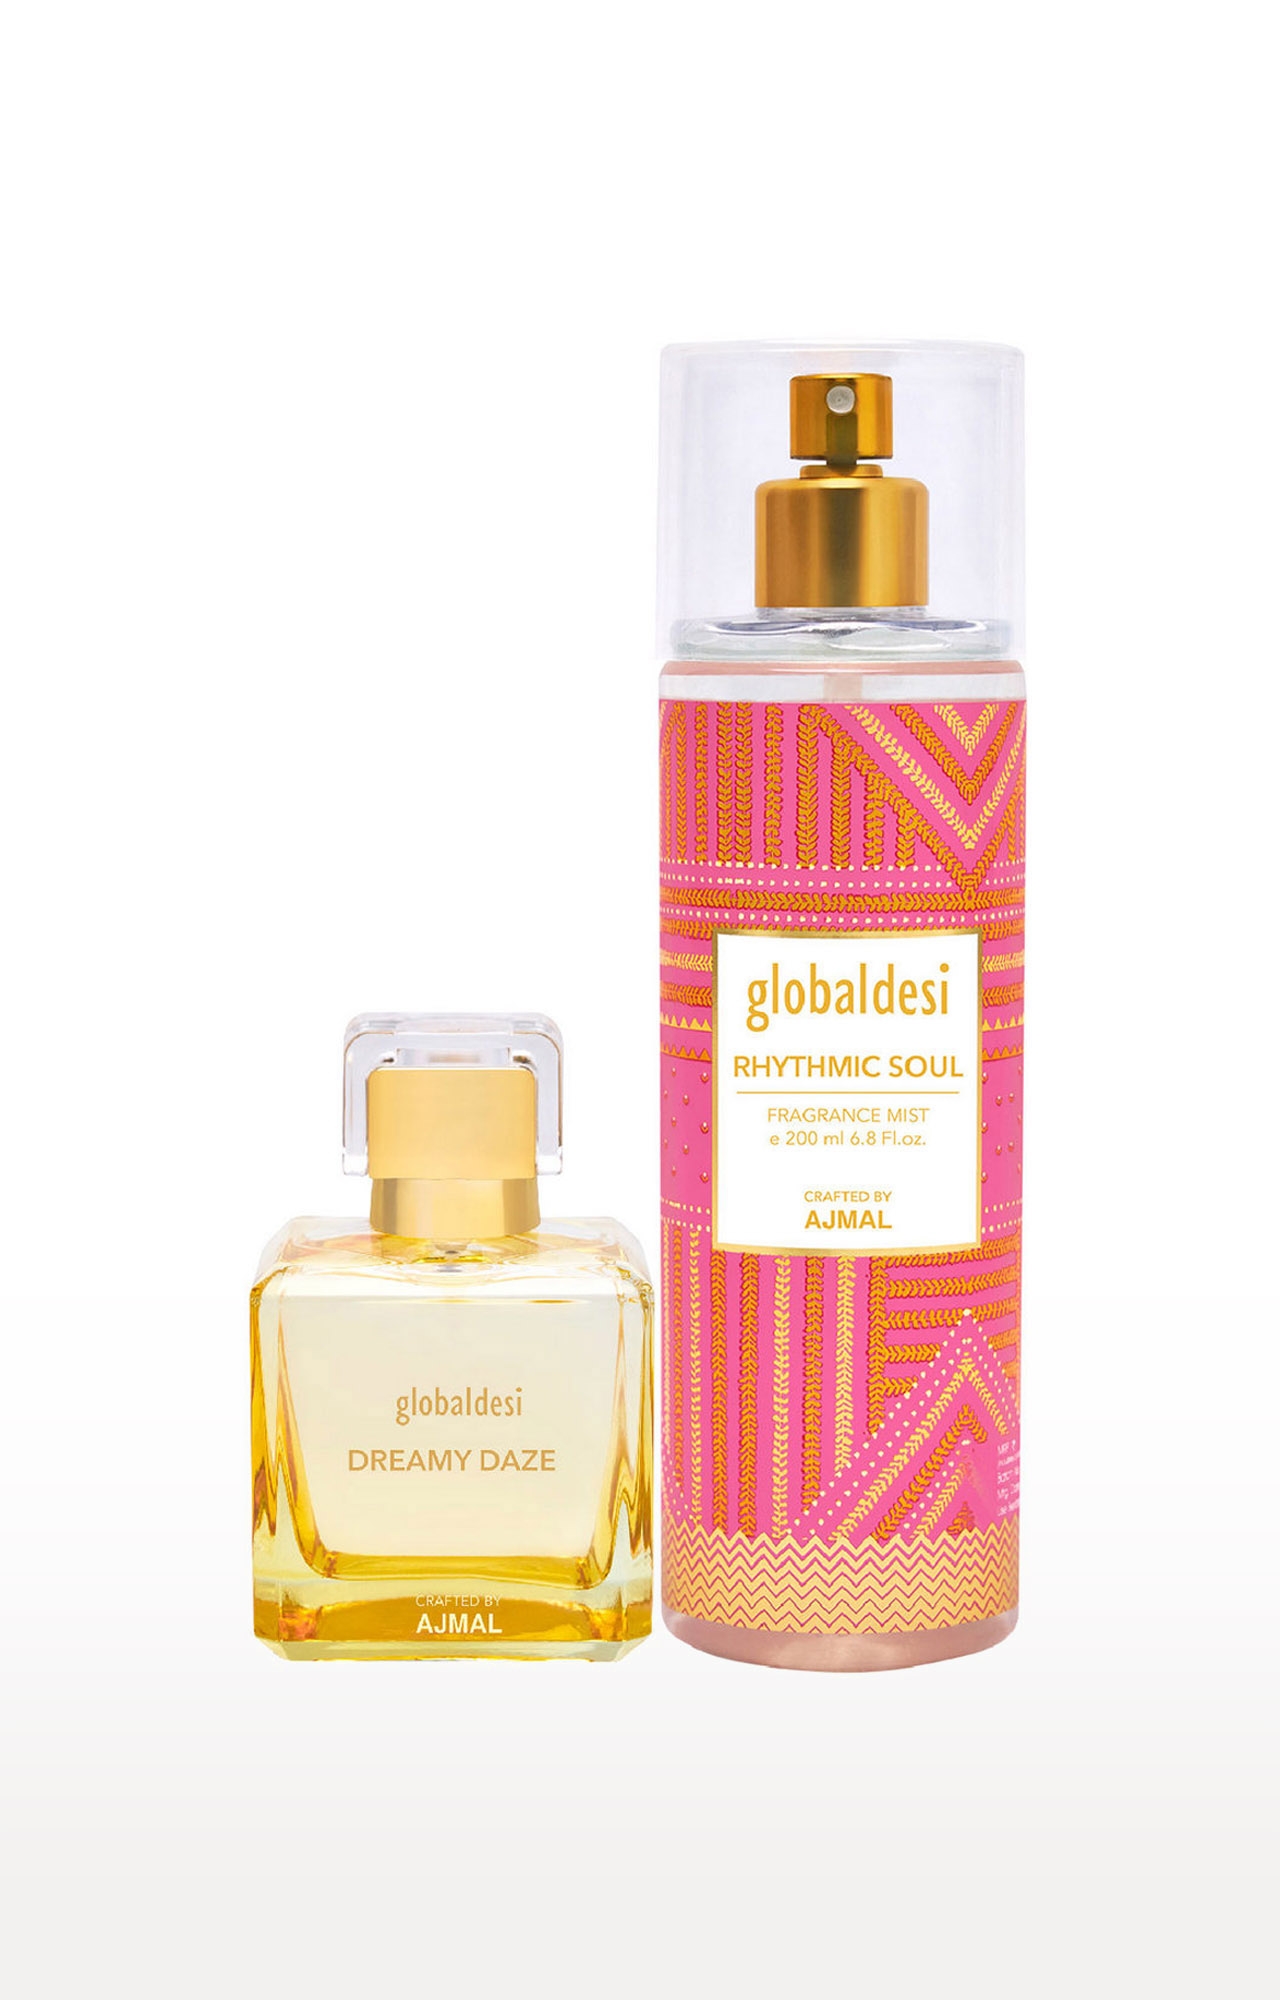 Global Desi Crafted By Ajmal | Global Desi Dreamy Daze EDP 50ML & Rhytmic Soul Body Mist 200ML Pack of 2 for Women Crafted by Ajmal + 2 Testers